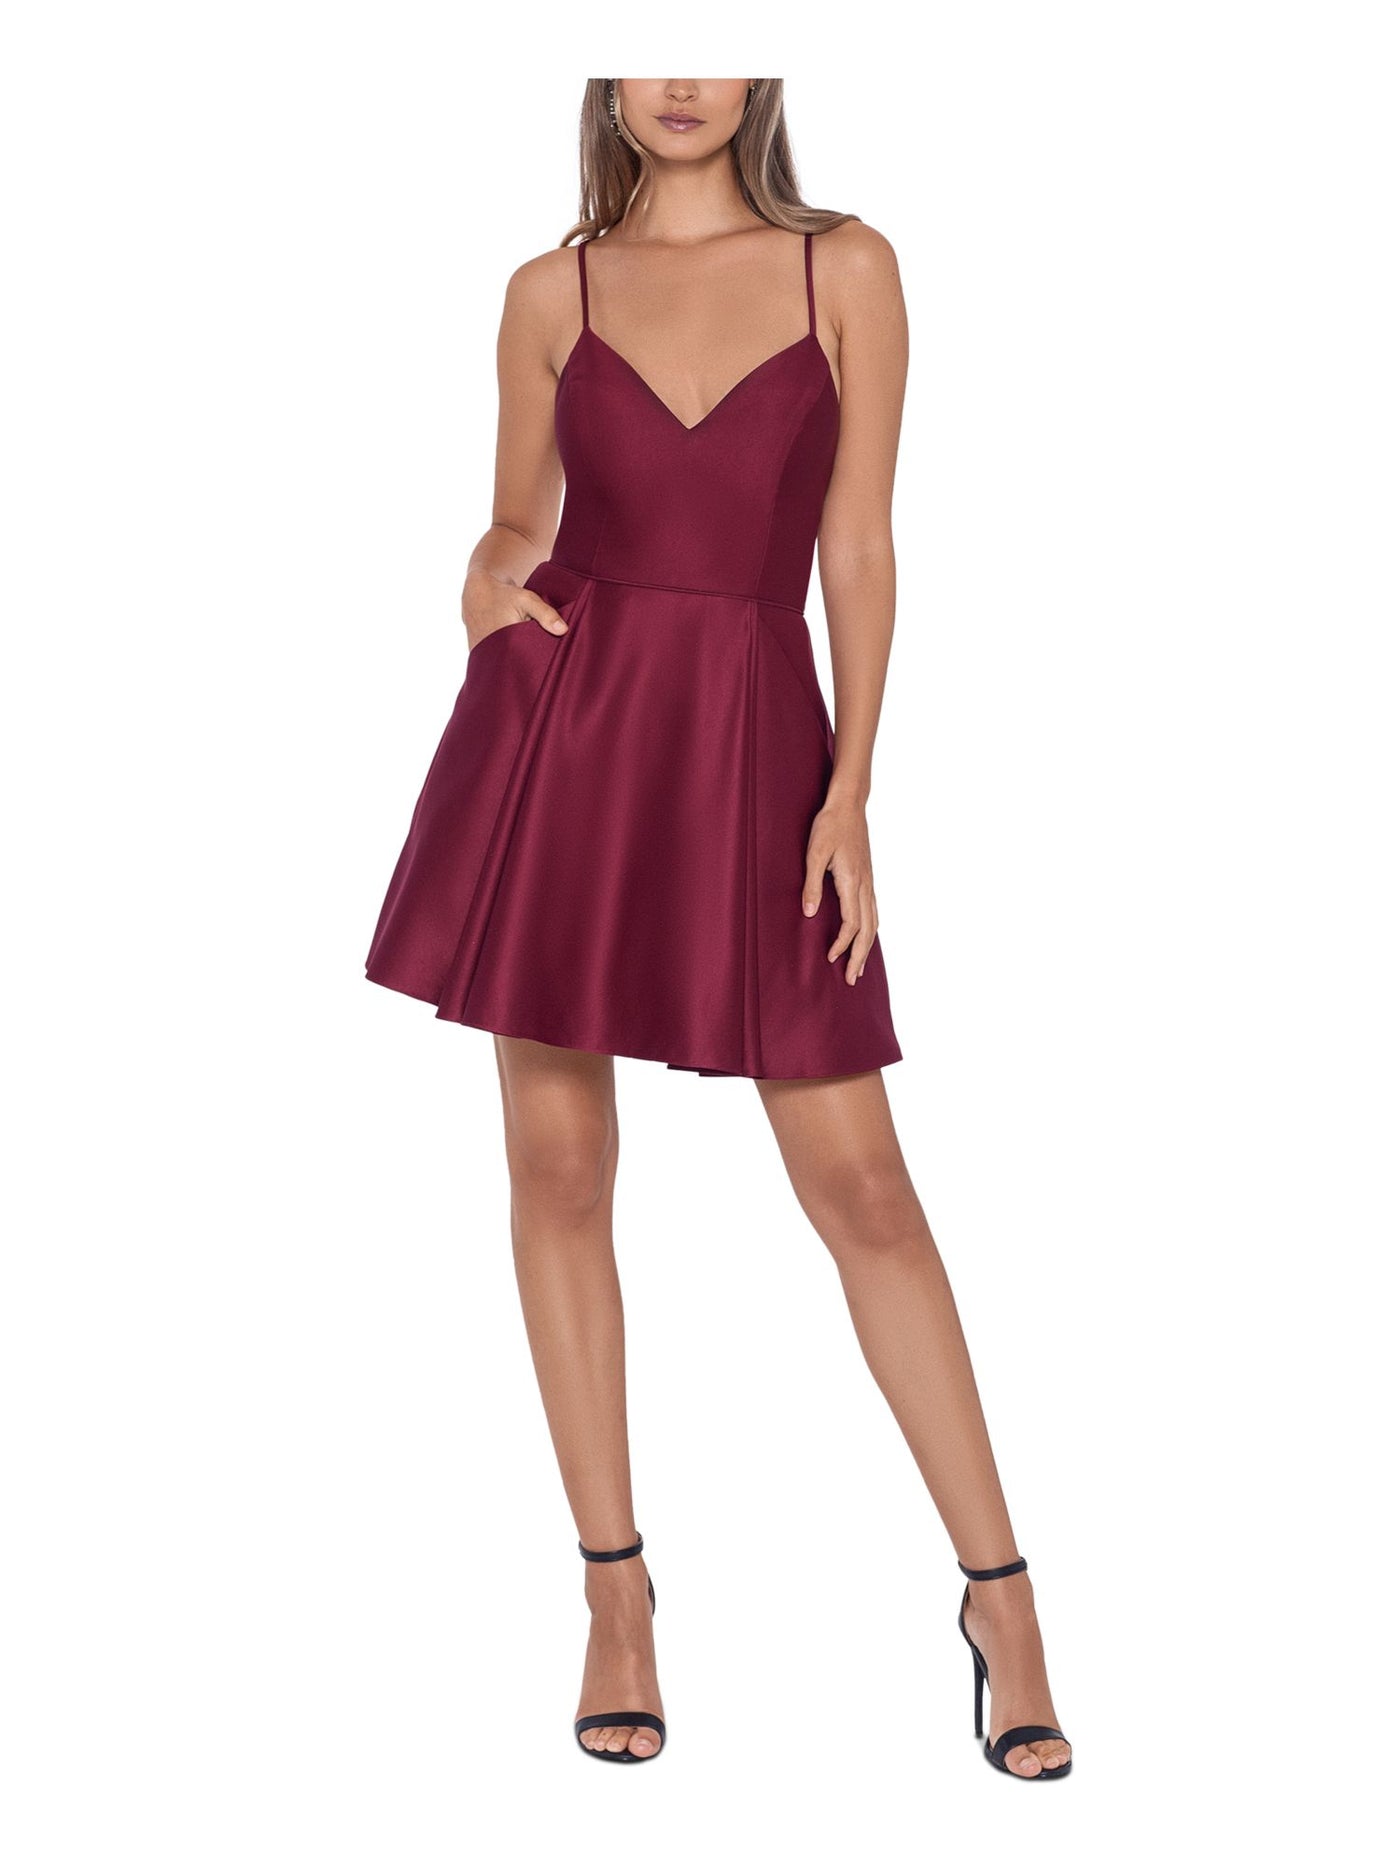 BLONDIE Womens Maroon Zippered Pocketed Lace Back Pleated Skirt Spaghetti Strap V Neck Above The Knee Party Fit + Flare Dress Juniors 11